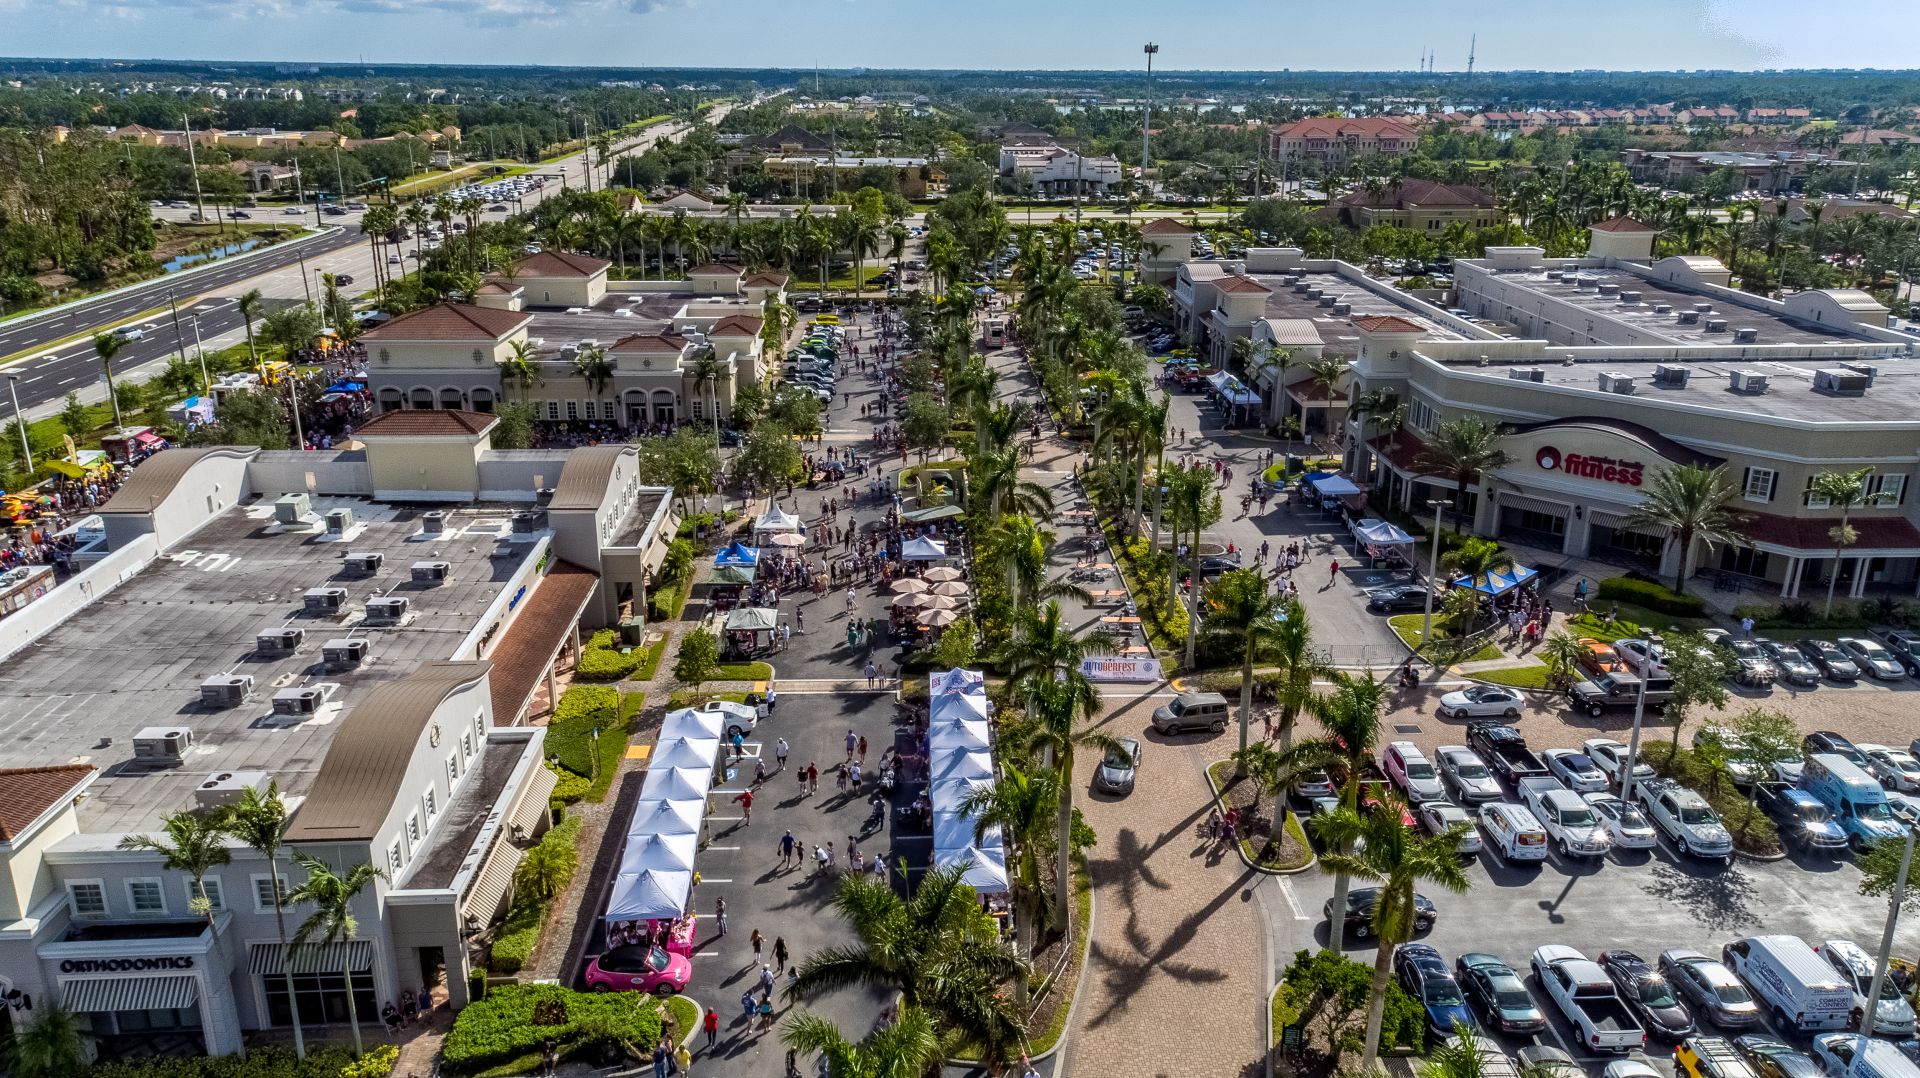 Aerial view of the festival